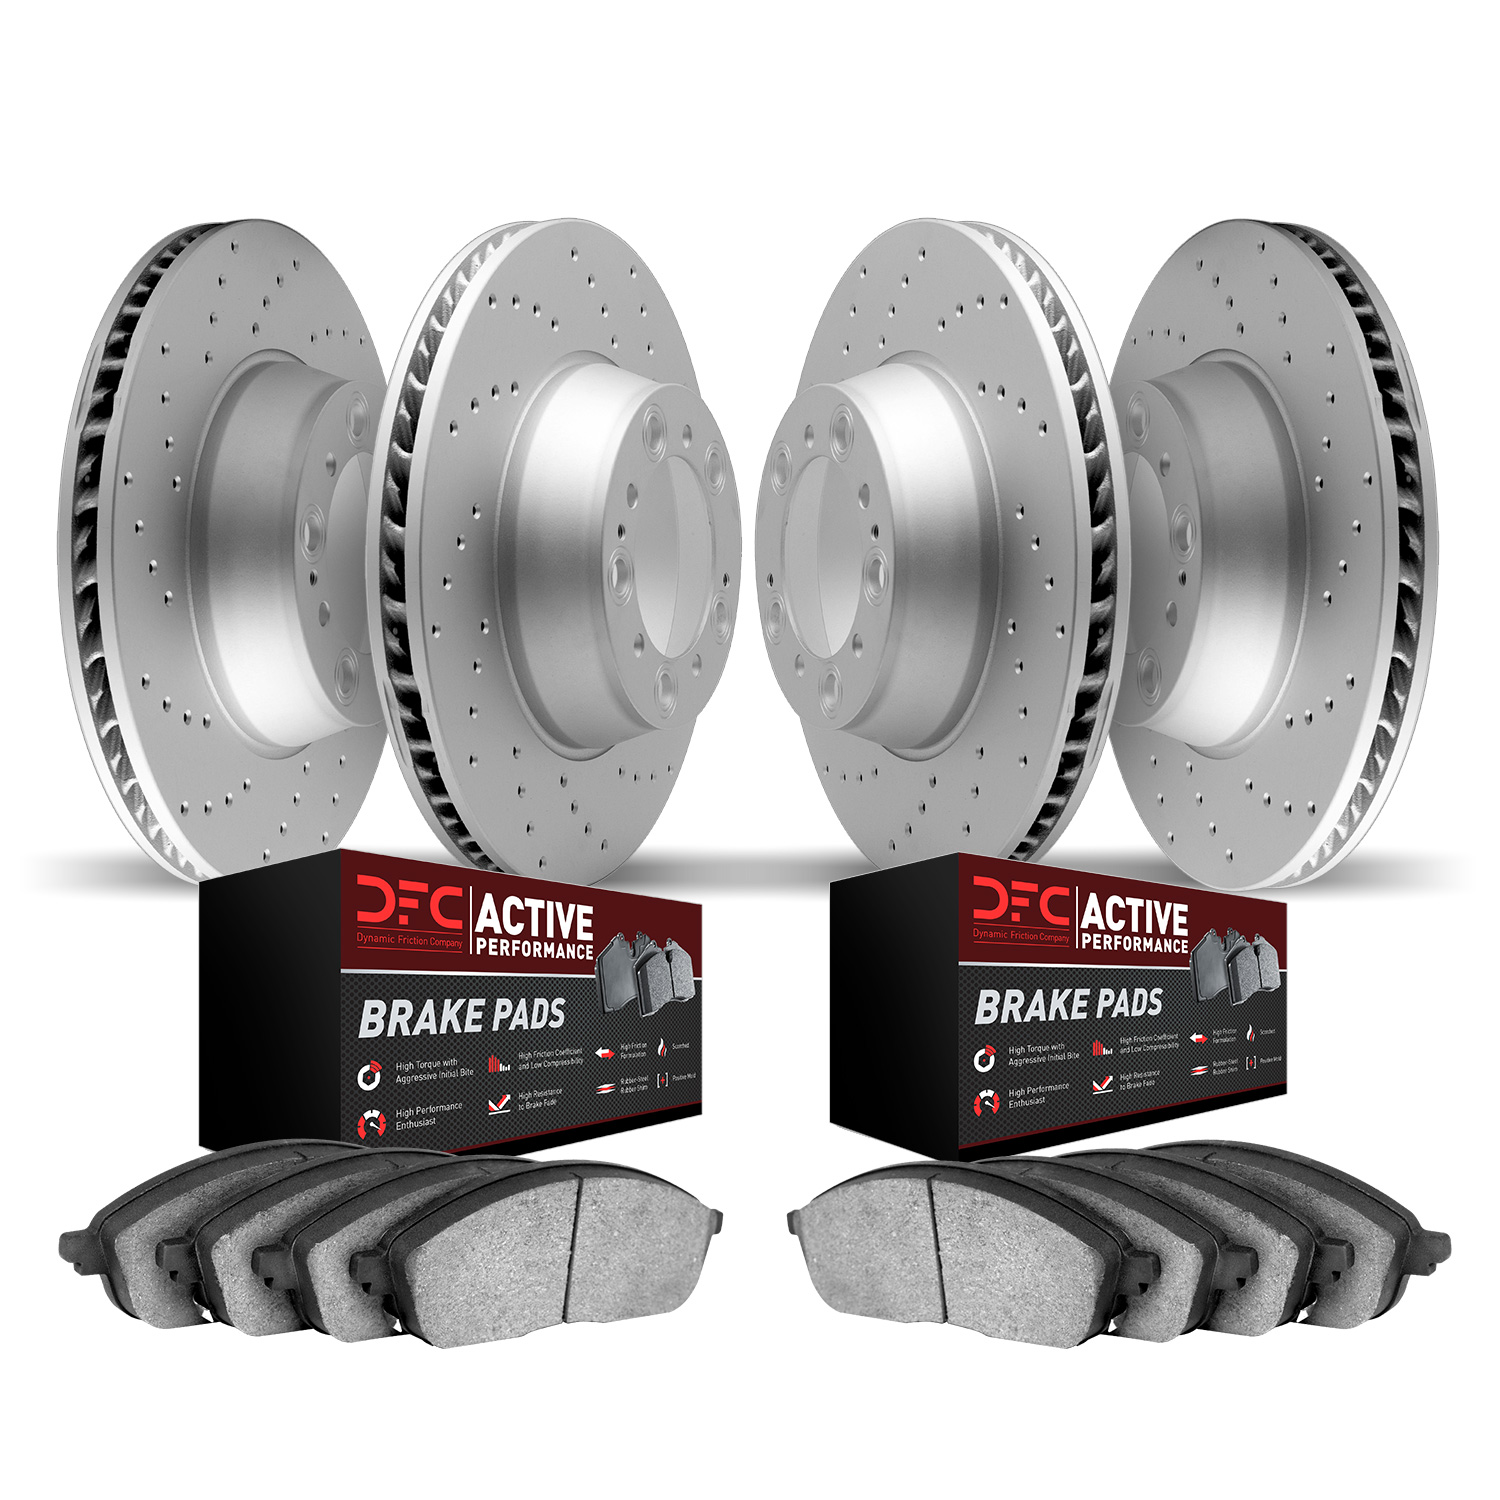 2704-67036 Geoperformance Drilled Brake Rotors with Active Performance Pads Kit, 2003-2011 Infiniti/Nissan, Position: Front and